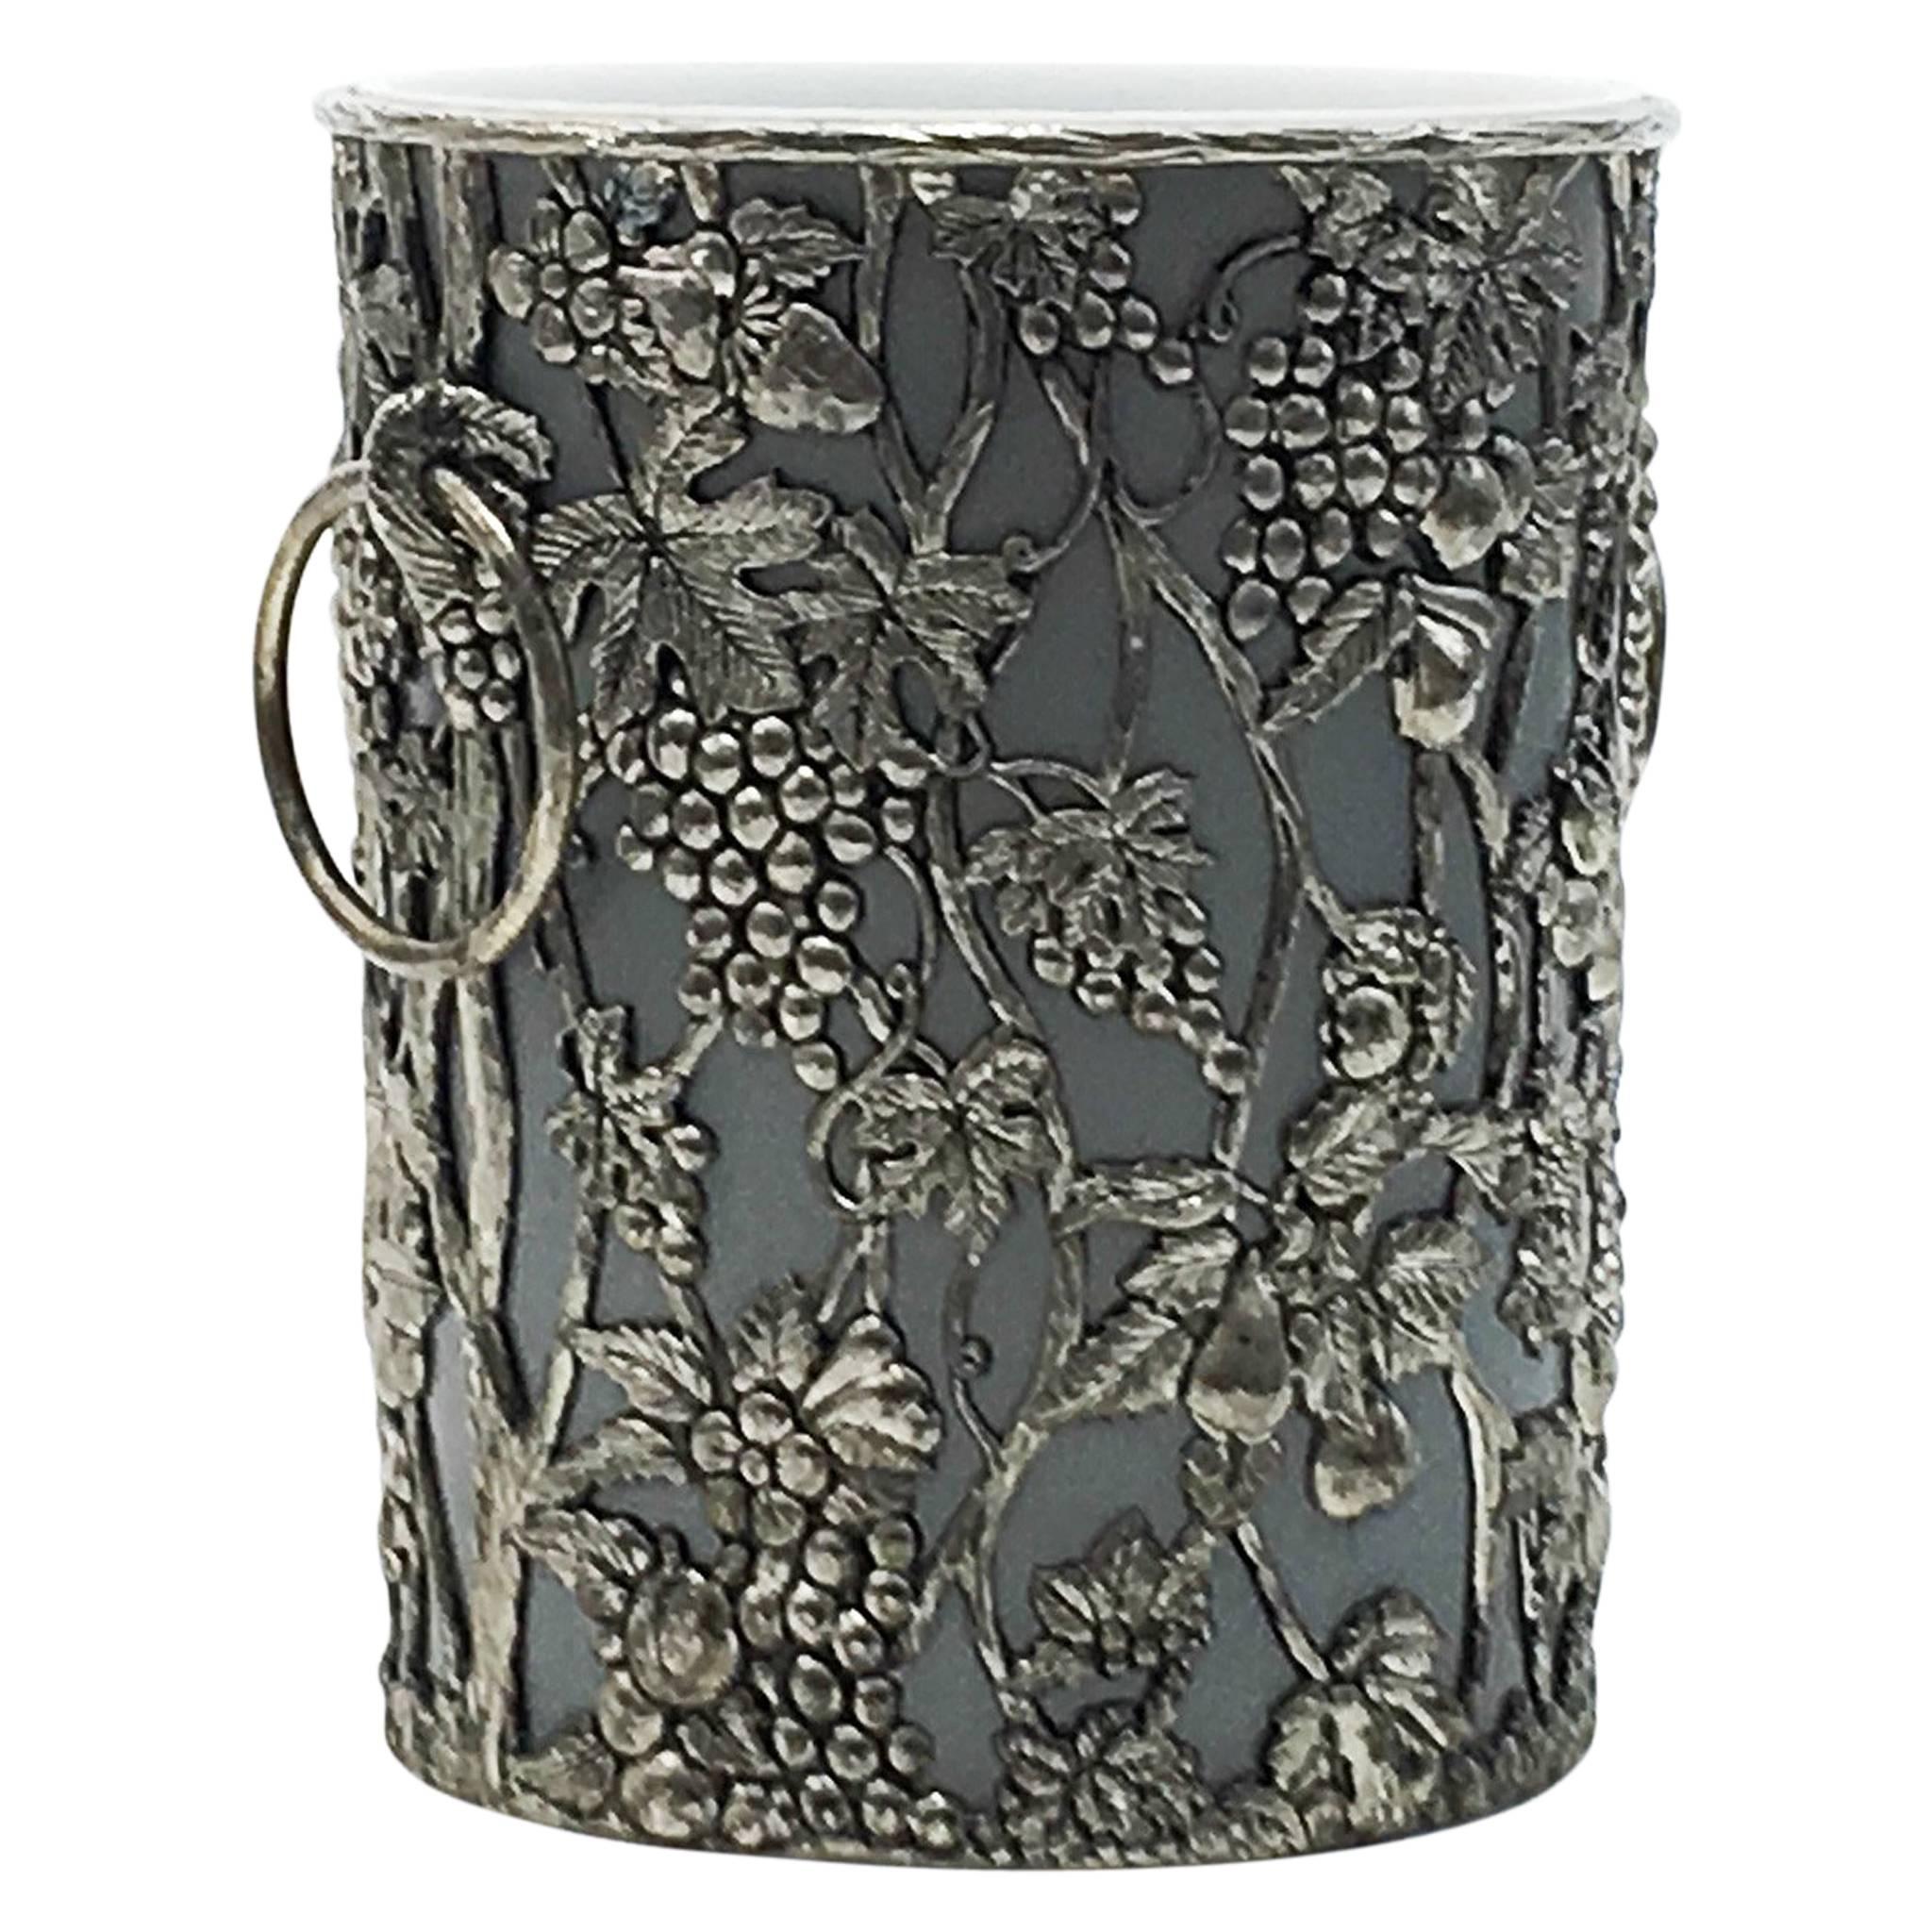 Champagne Bucket with Silvered Colored Floral Decor Frame